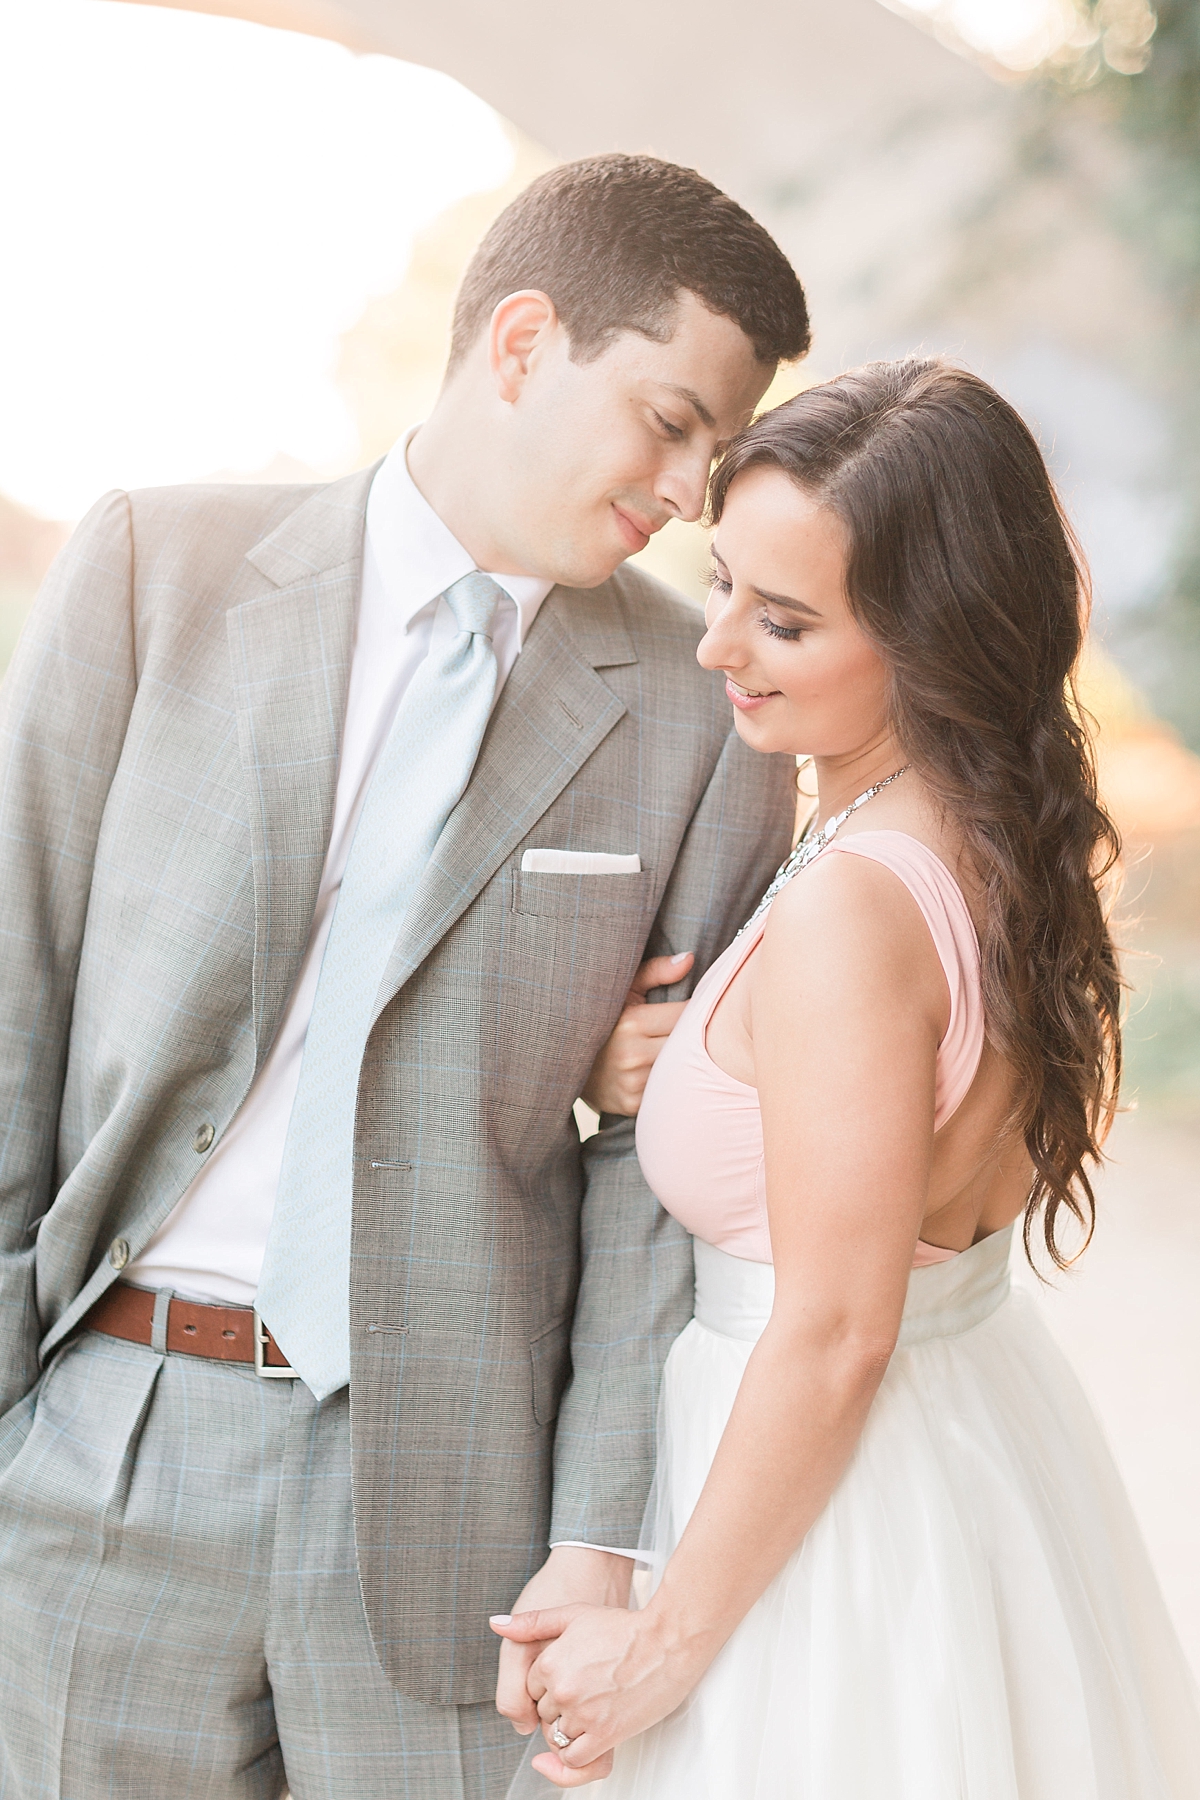 A stylish couple enjoys a sunrise engagement session along the iconic canals of Georgetown in Washington, DC; complete with a tulle skirt and Louboutin heels.